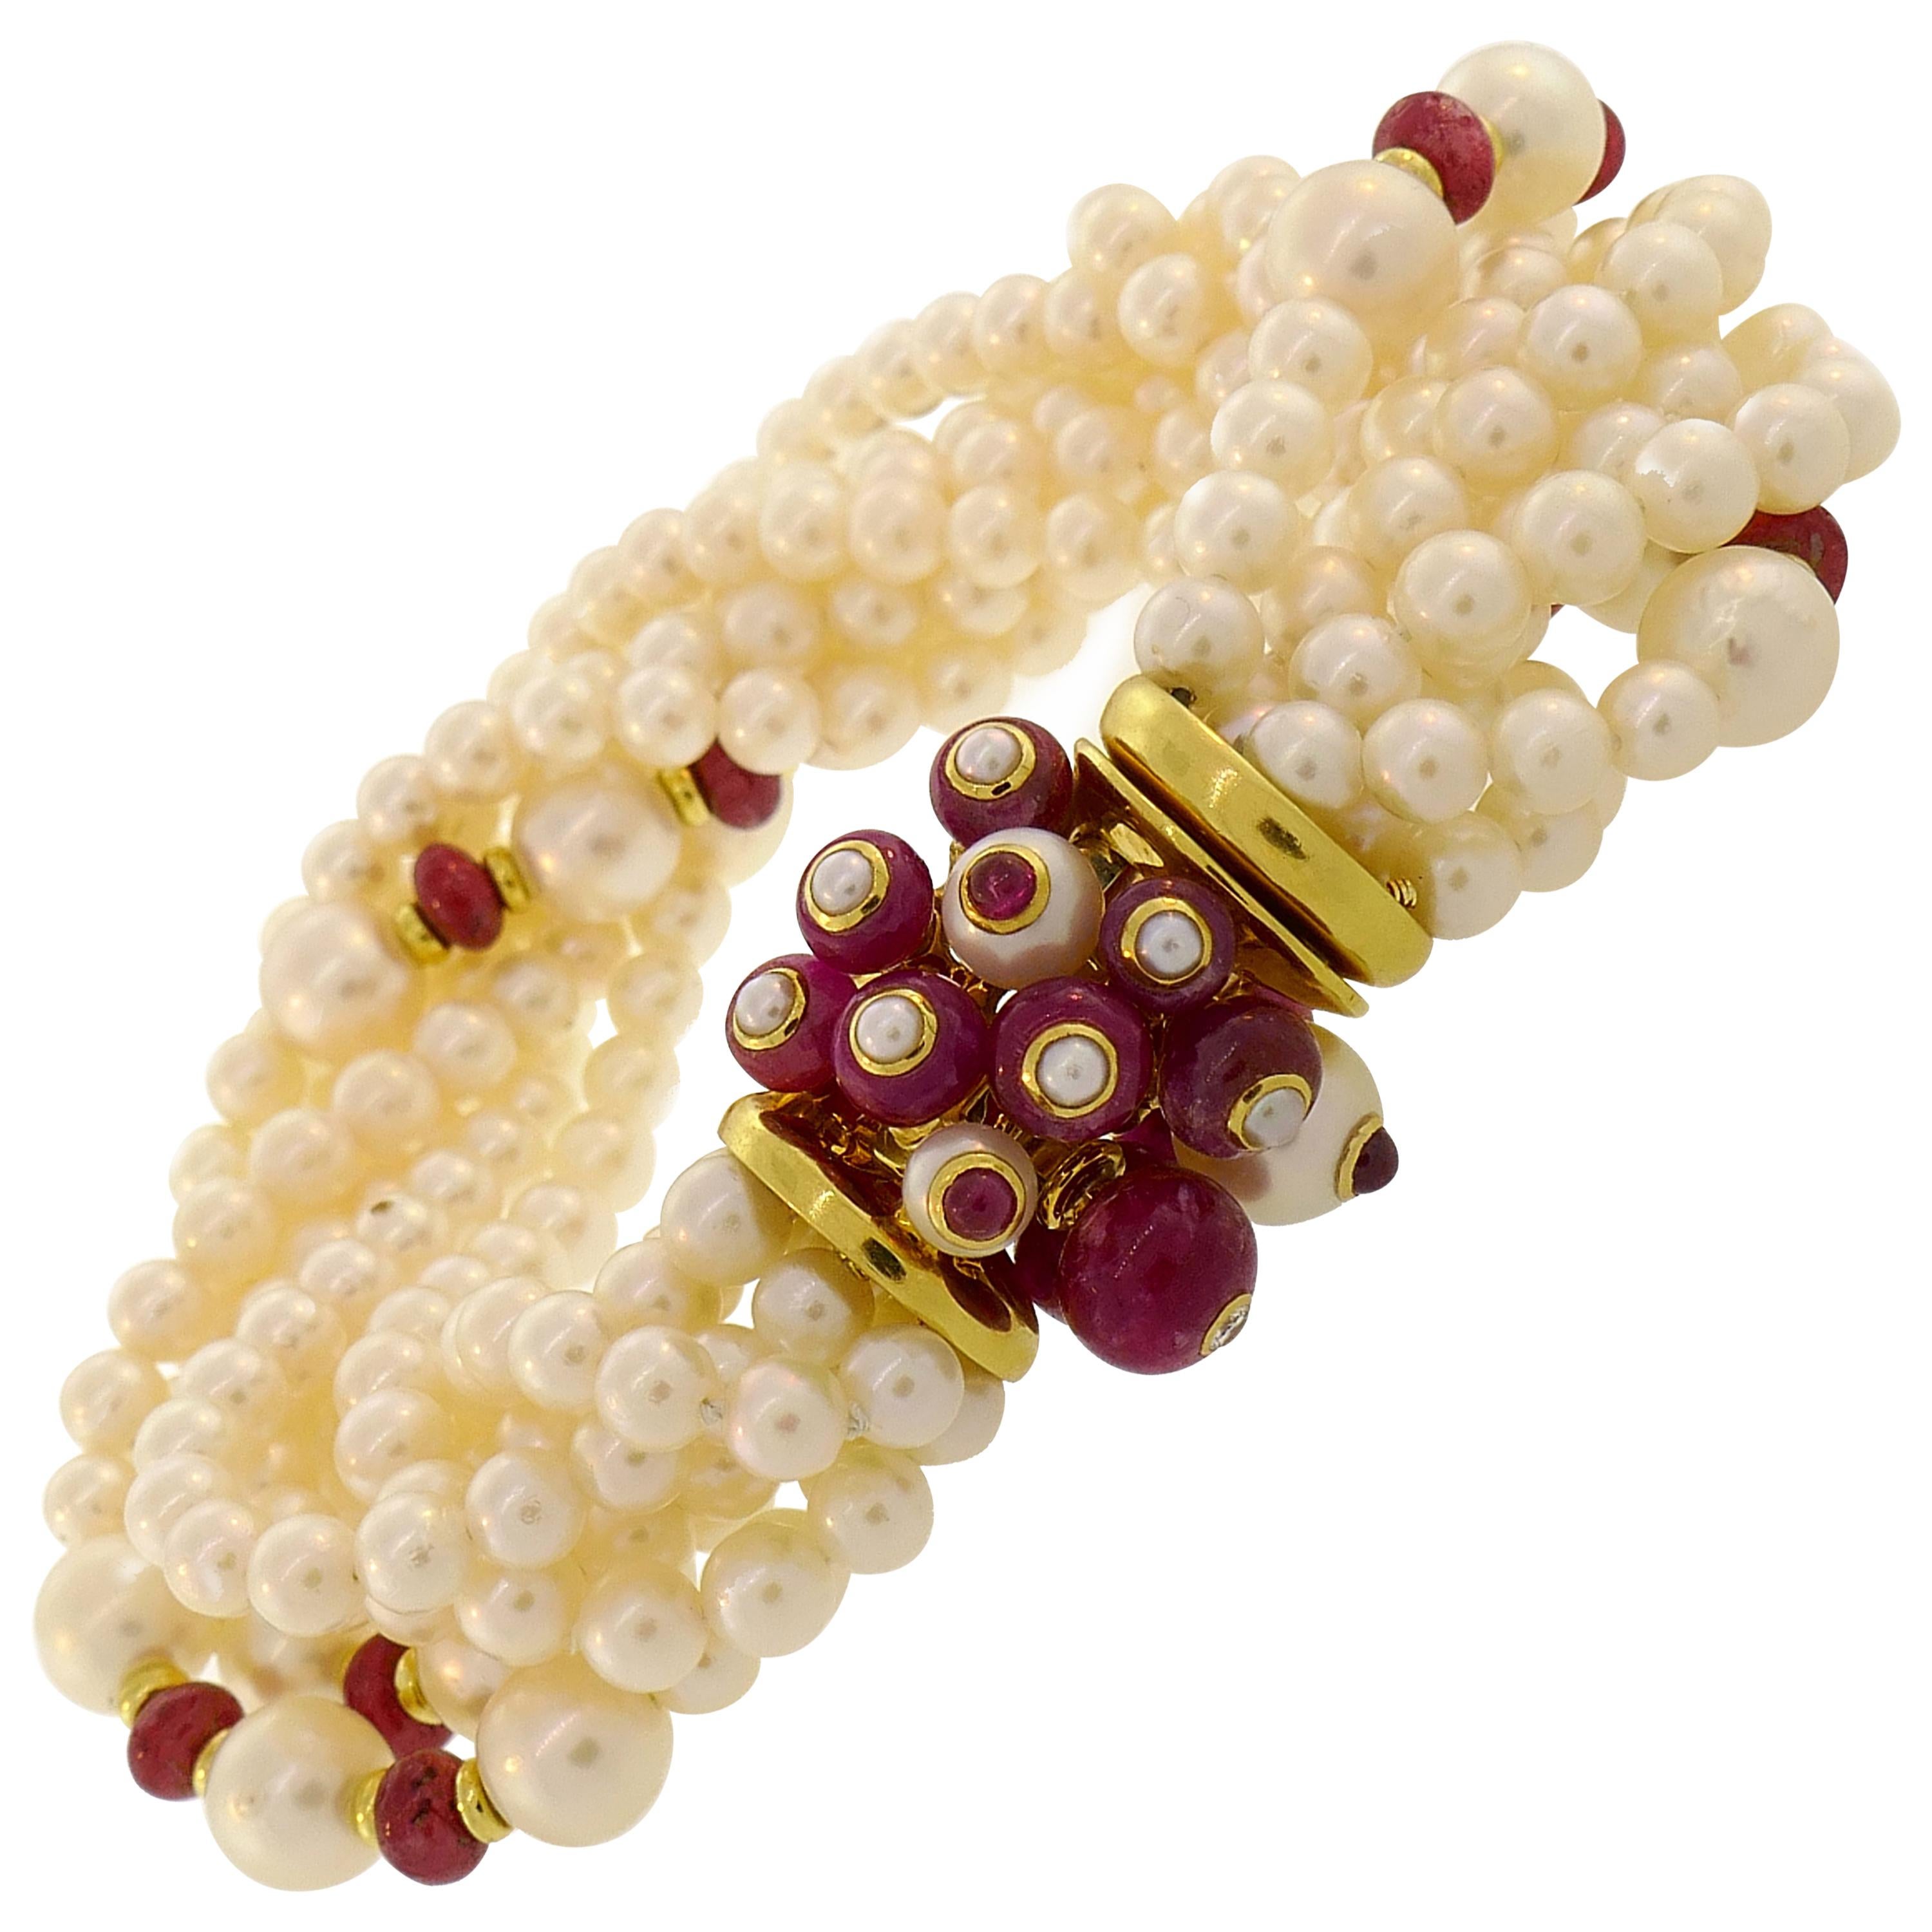 Trianon Pearl Ruby Bracelet with Yellow Gold Clasp Bead Multi Strand Diamond